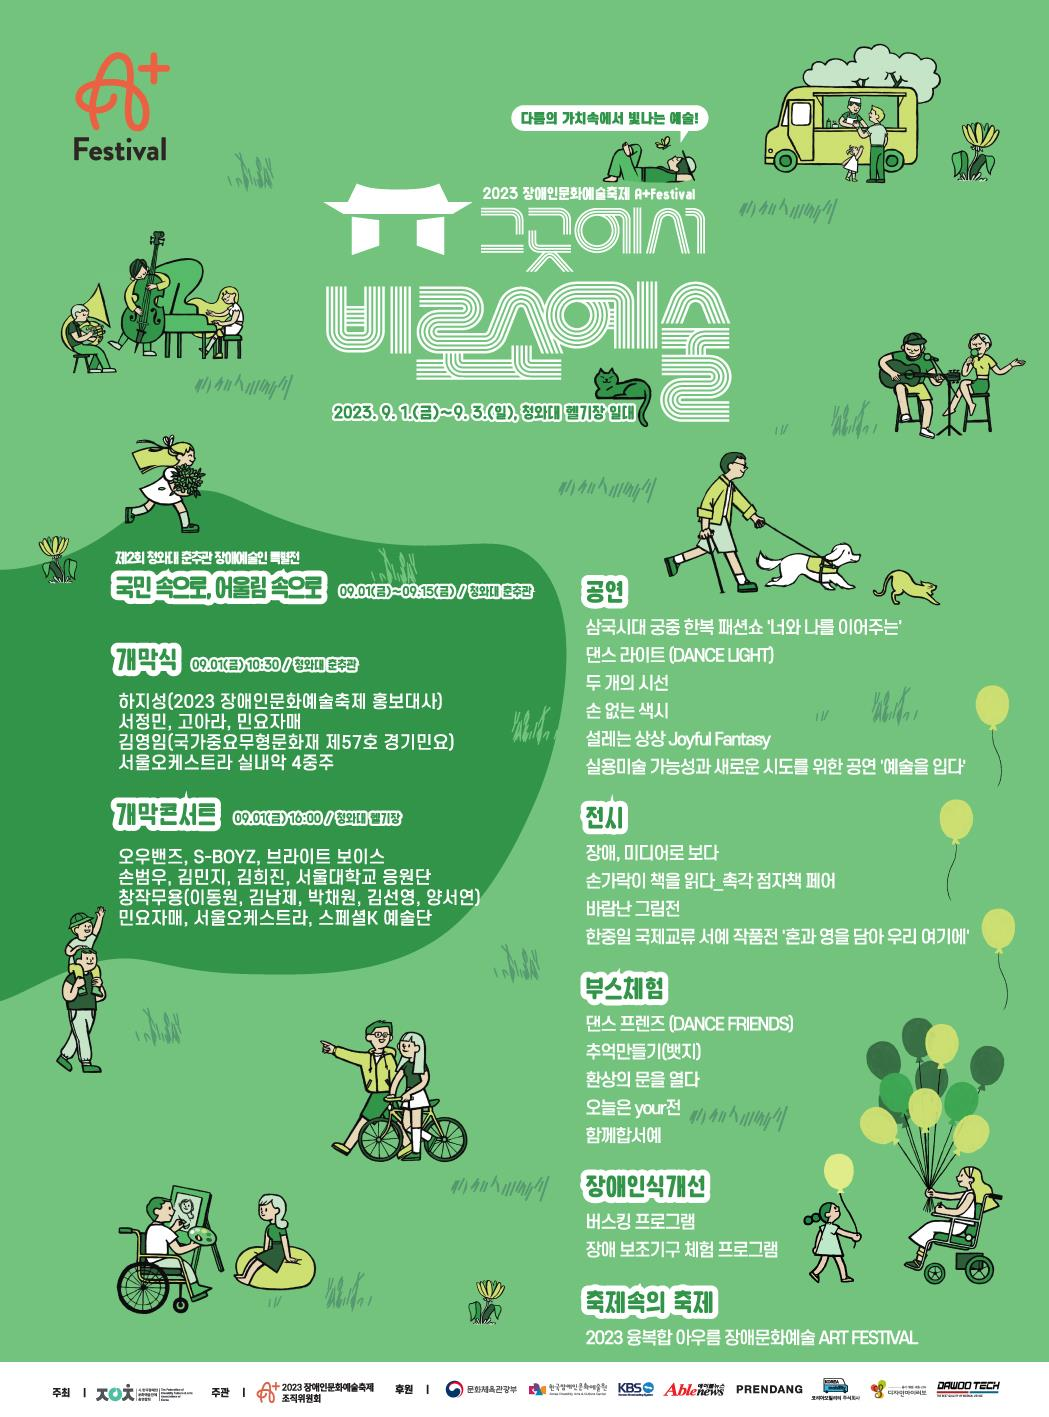 2023 Disabled Culture and Arts Festival A+ Festival